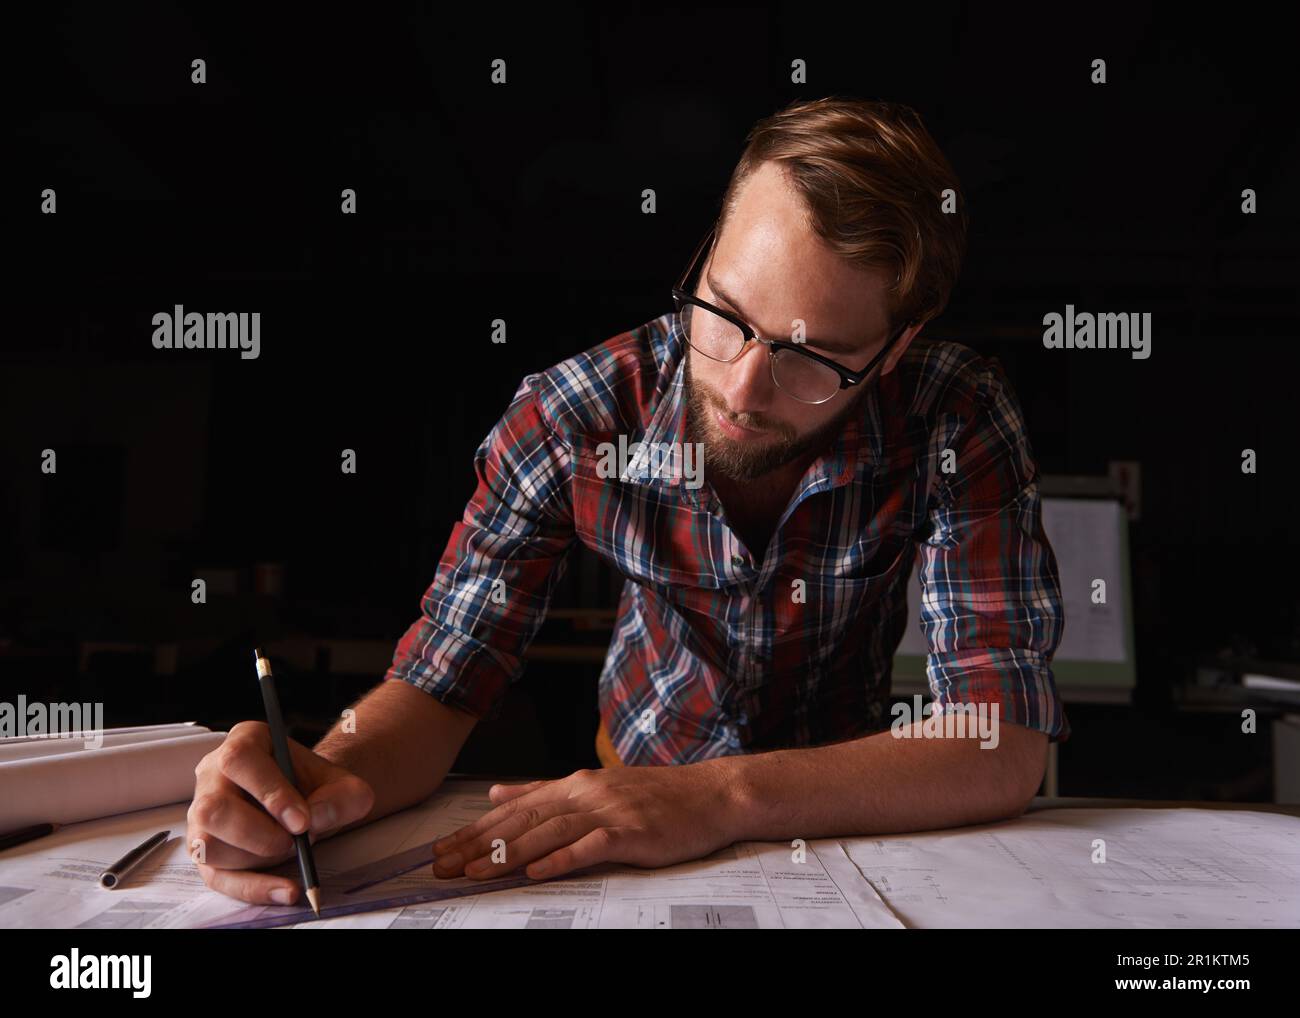 He desired to make the world beautiful. a young man sitting indoors working on building plans. Stock Photo